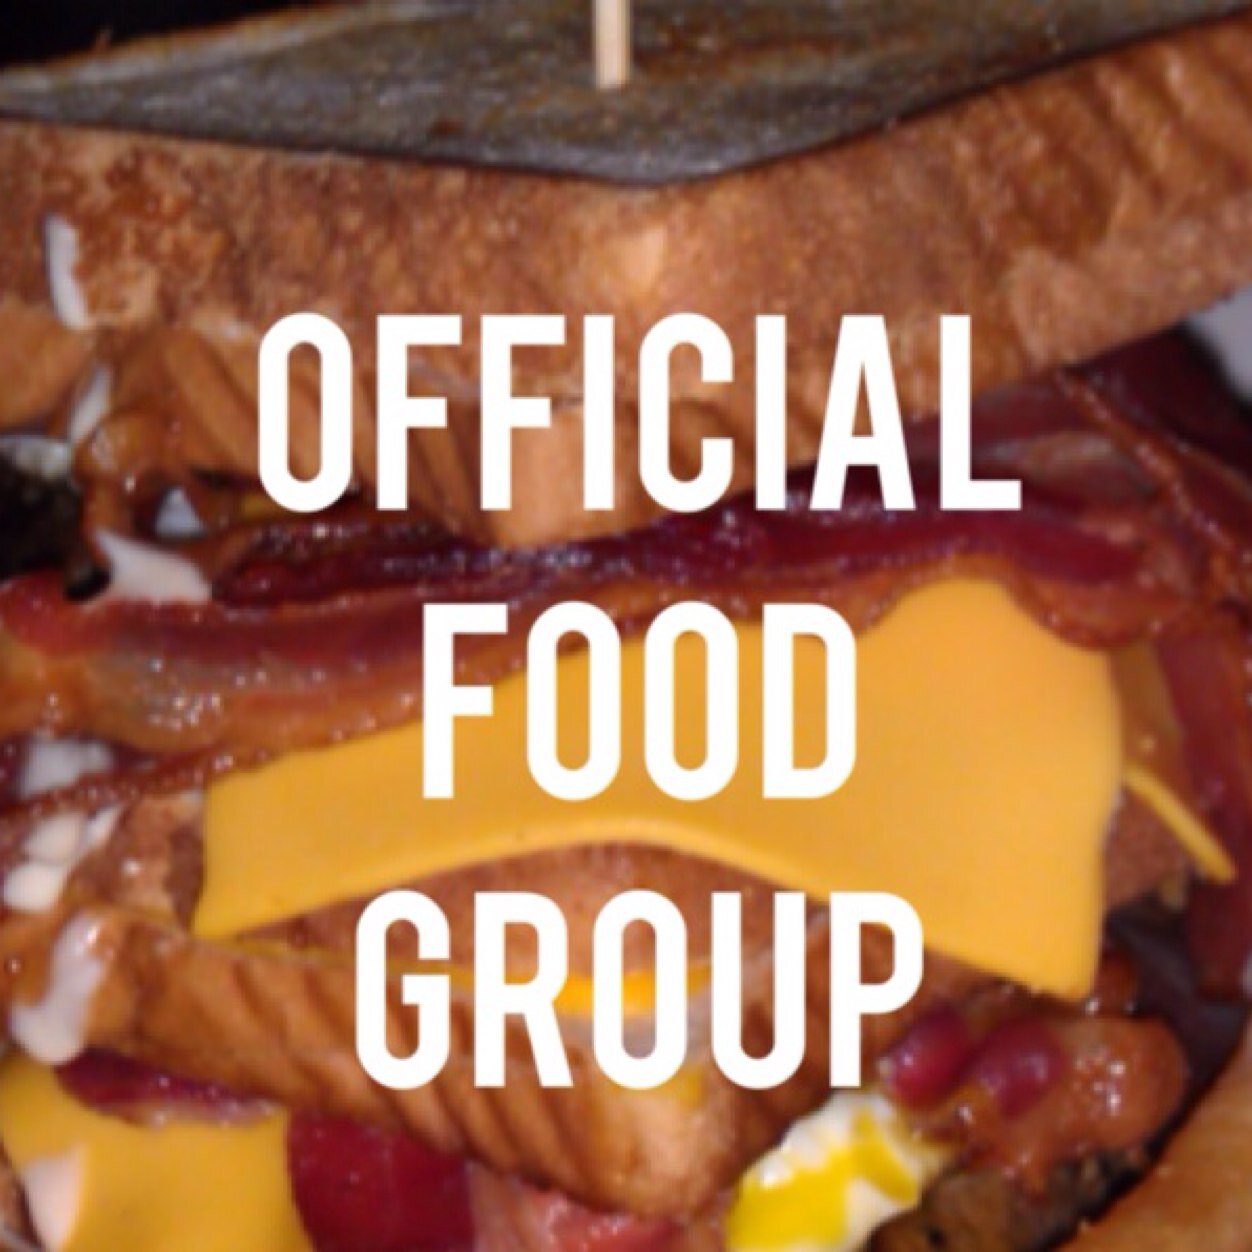 We are 7 hungry friends spread across the country who love great food.
Tag #officialfoodgroup and join us!